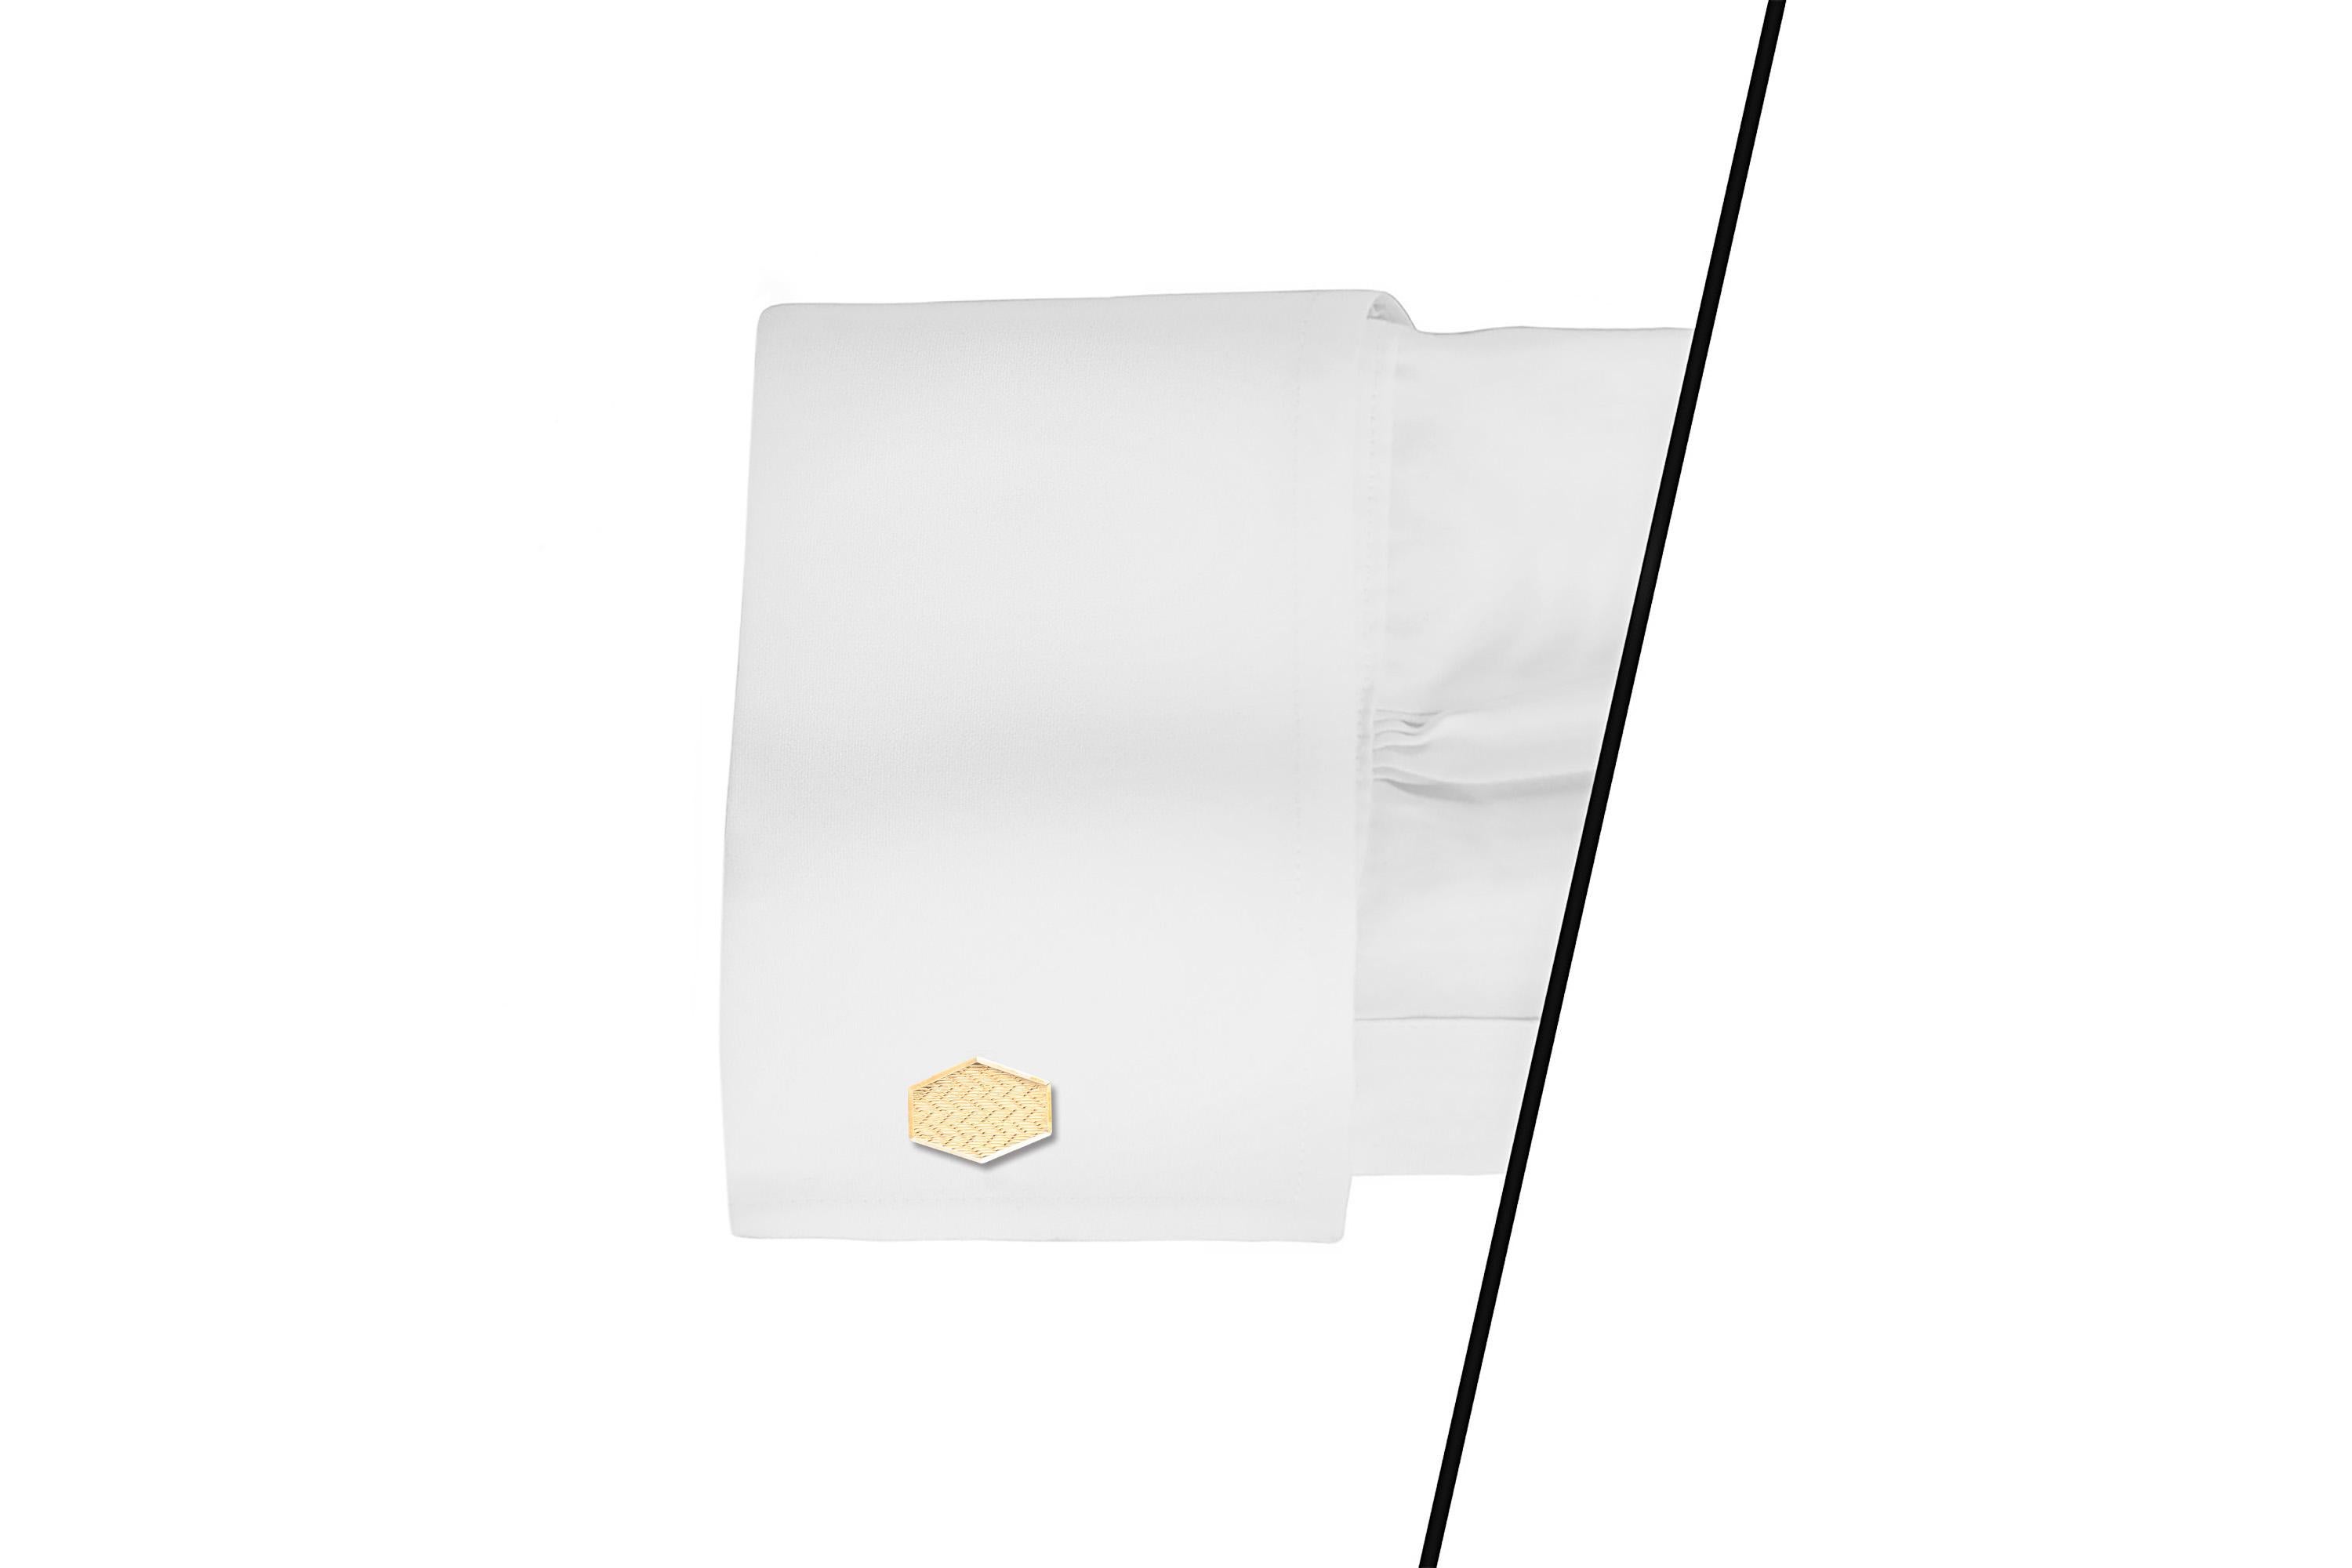 Hexagon Gold Cufflinks In Excellent Condition For Sale In New York, NY